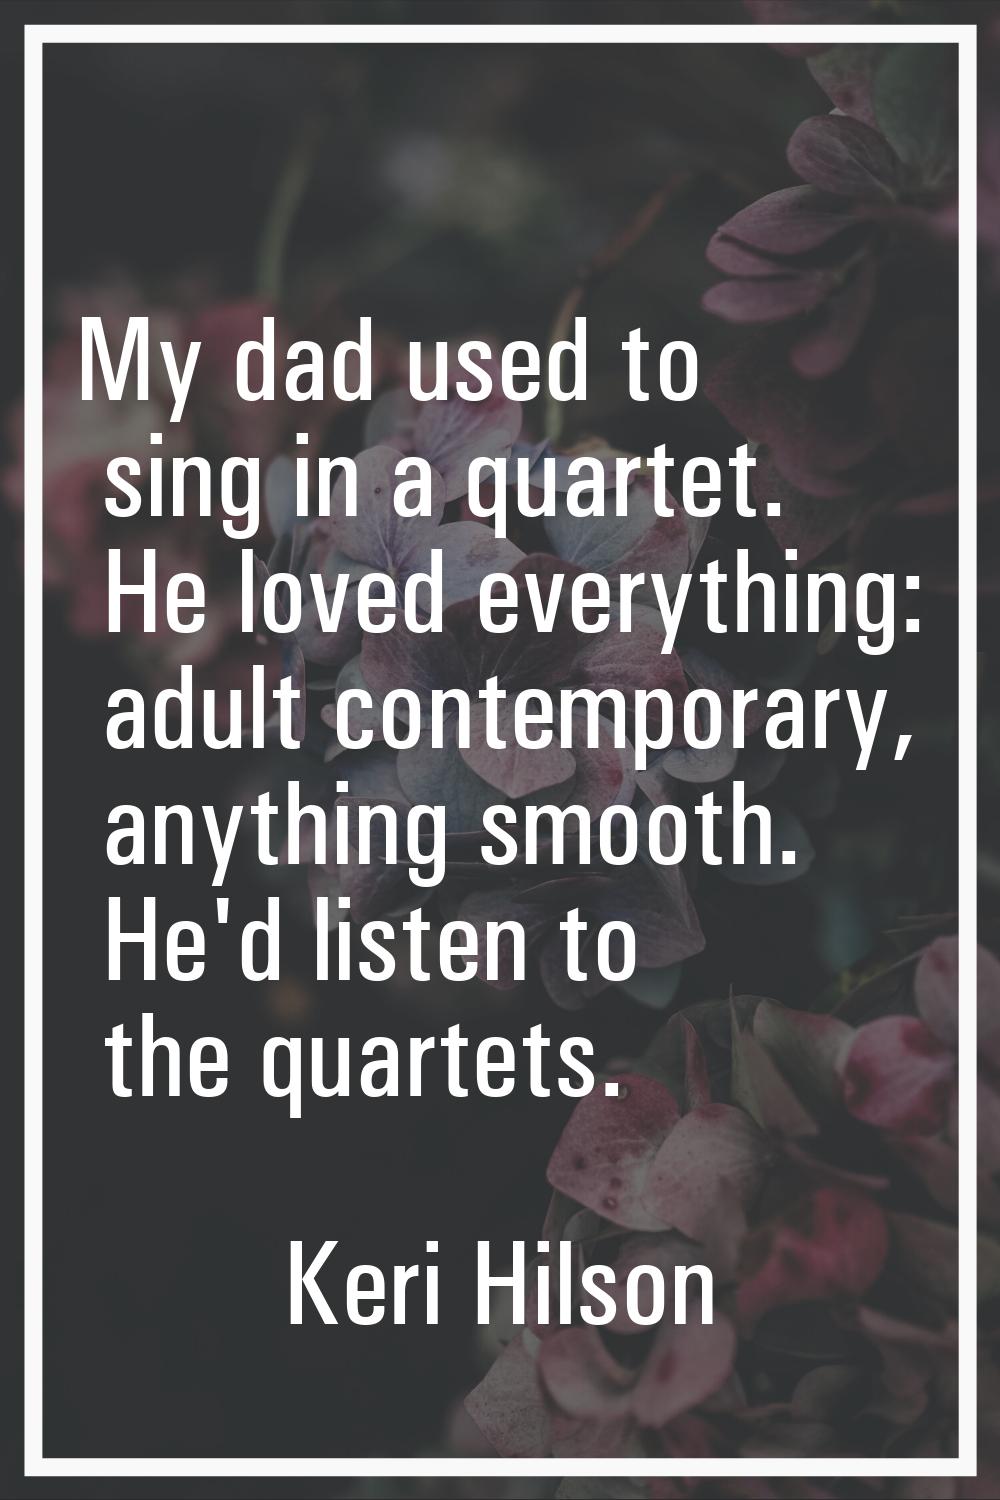 My dad used to sing in a quartet. He loved everything: adult contemporary, anything smooth. He'd li